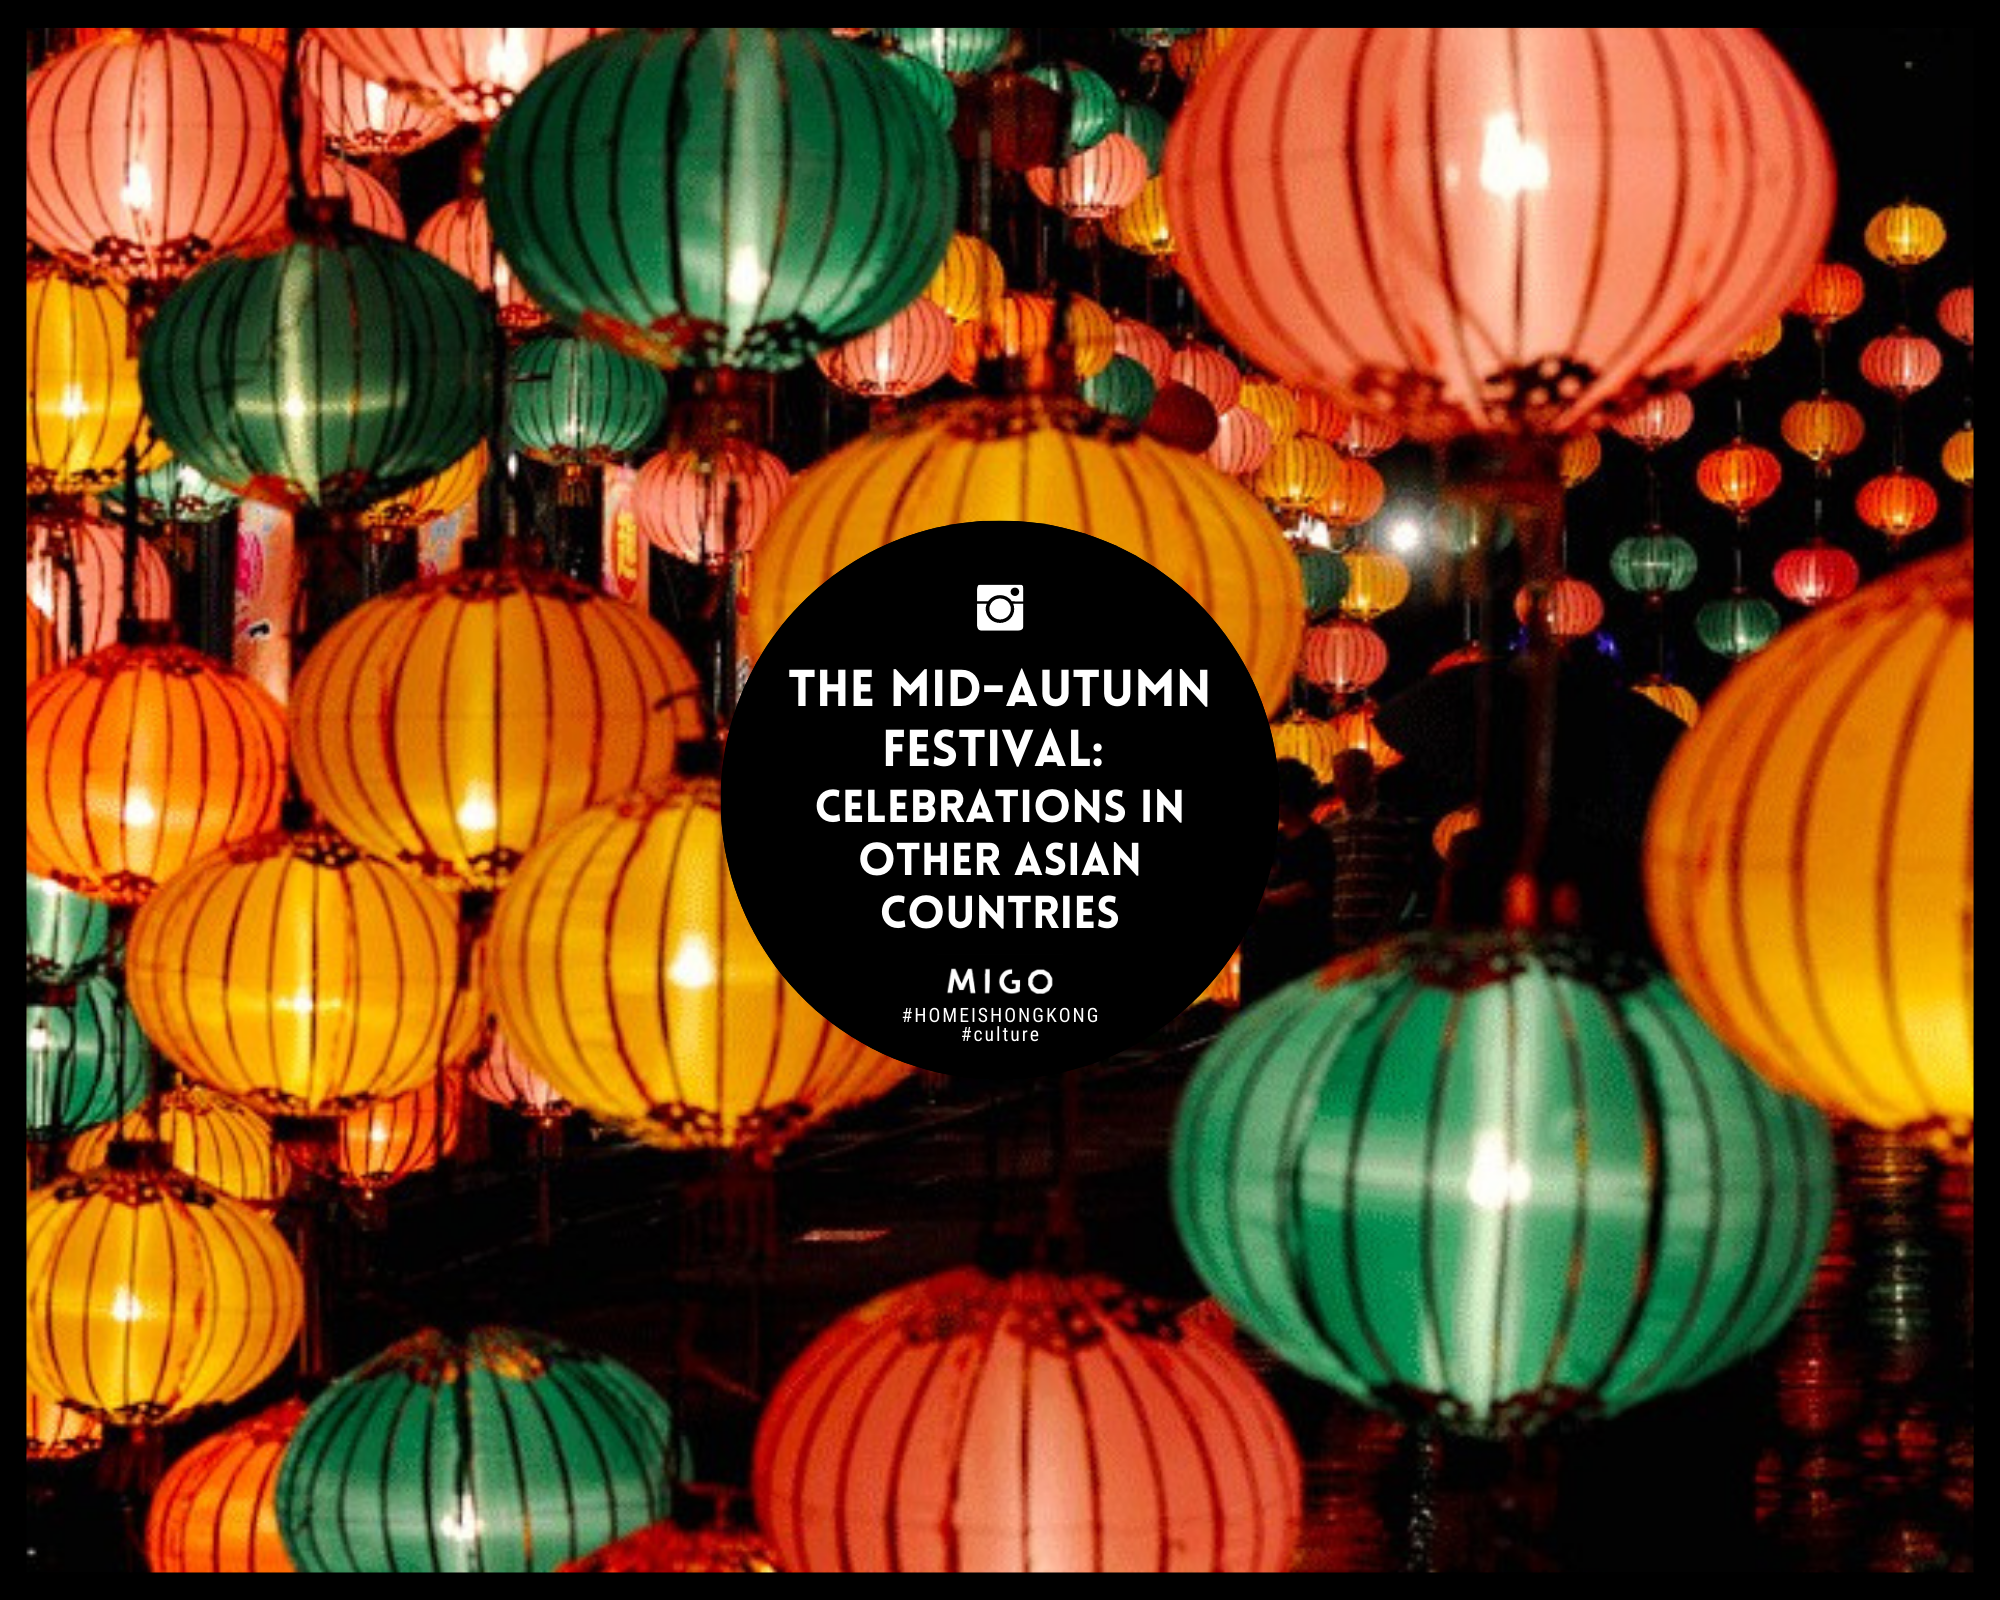 The Mid-Autumn Festival: Celebrations in Other Asian Countries